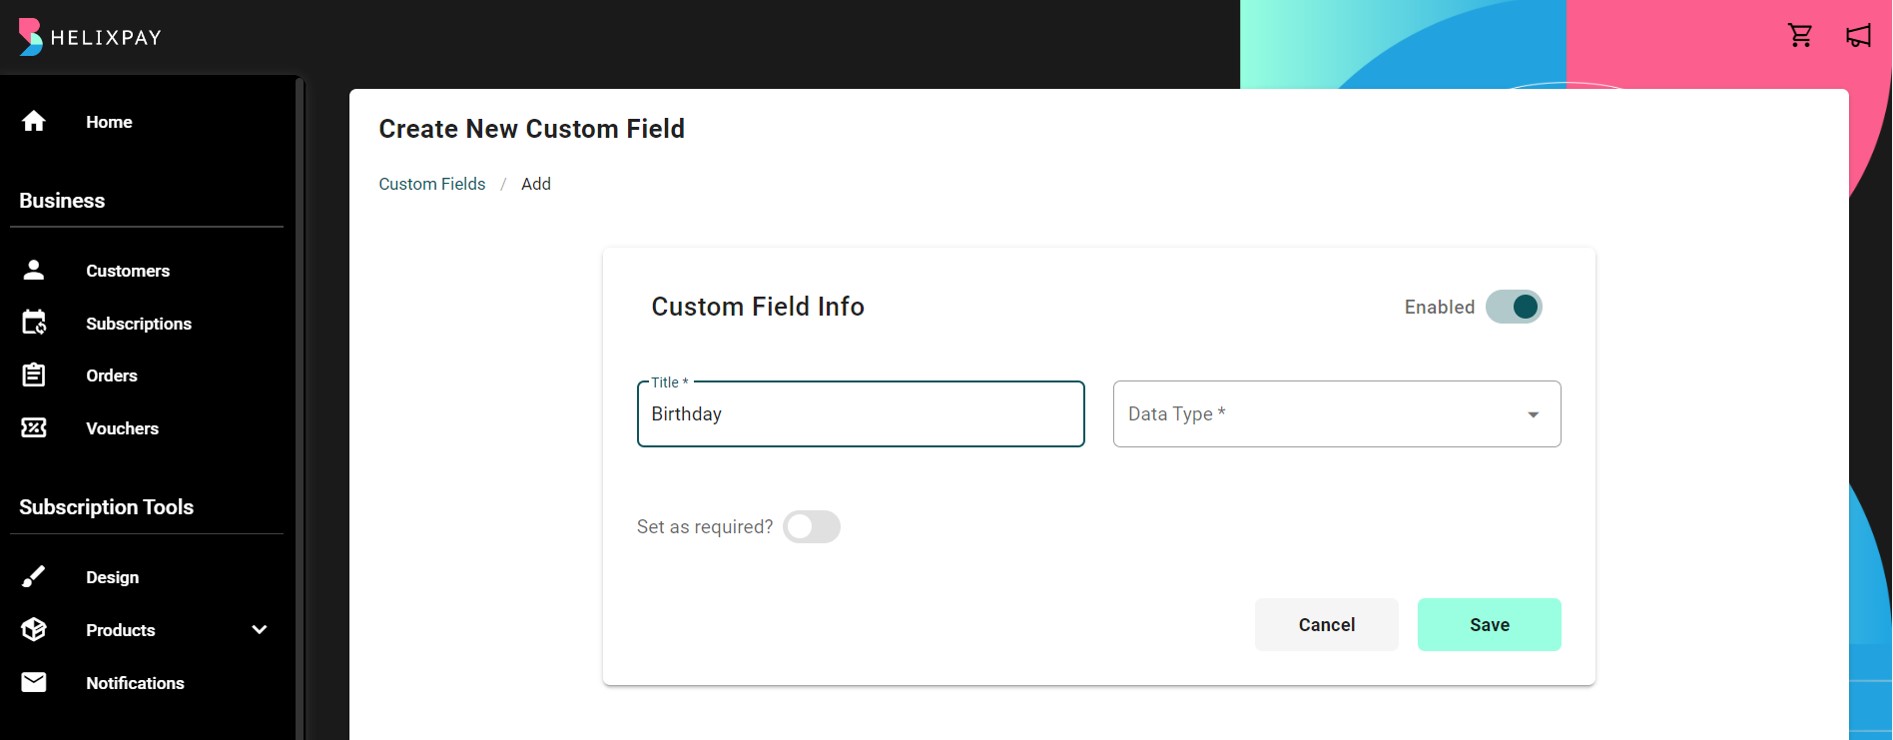 You may require the customer to fill out the information by enabling the 'Set as required?' button